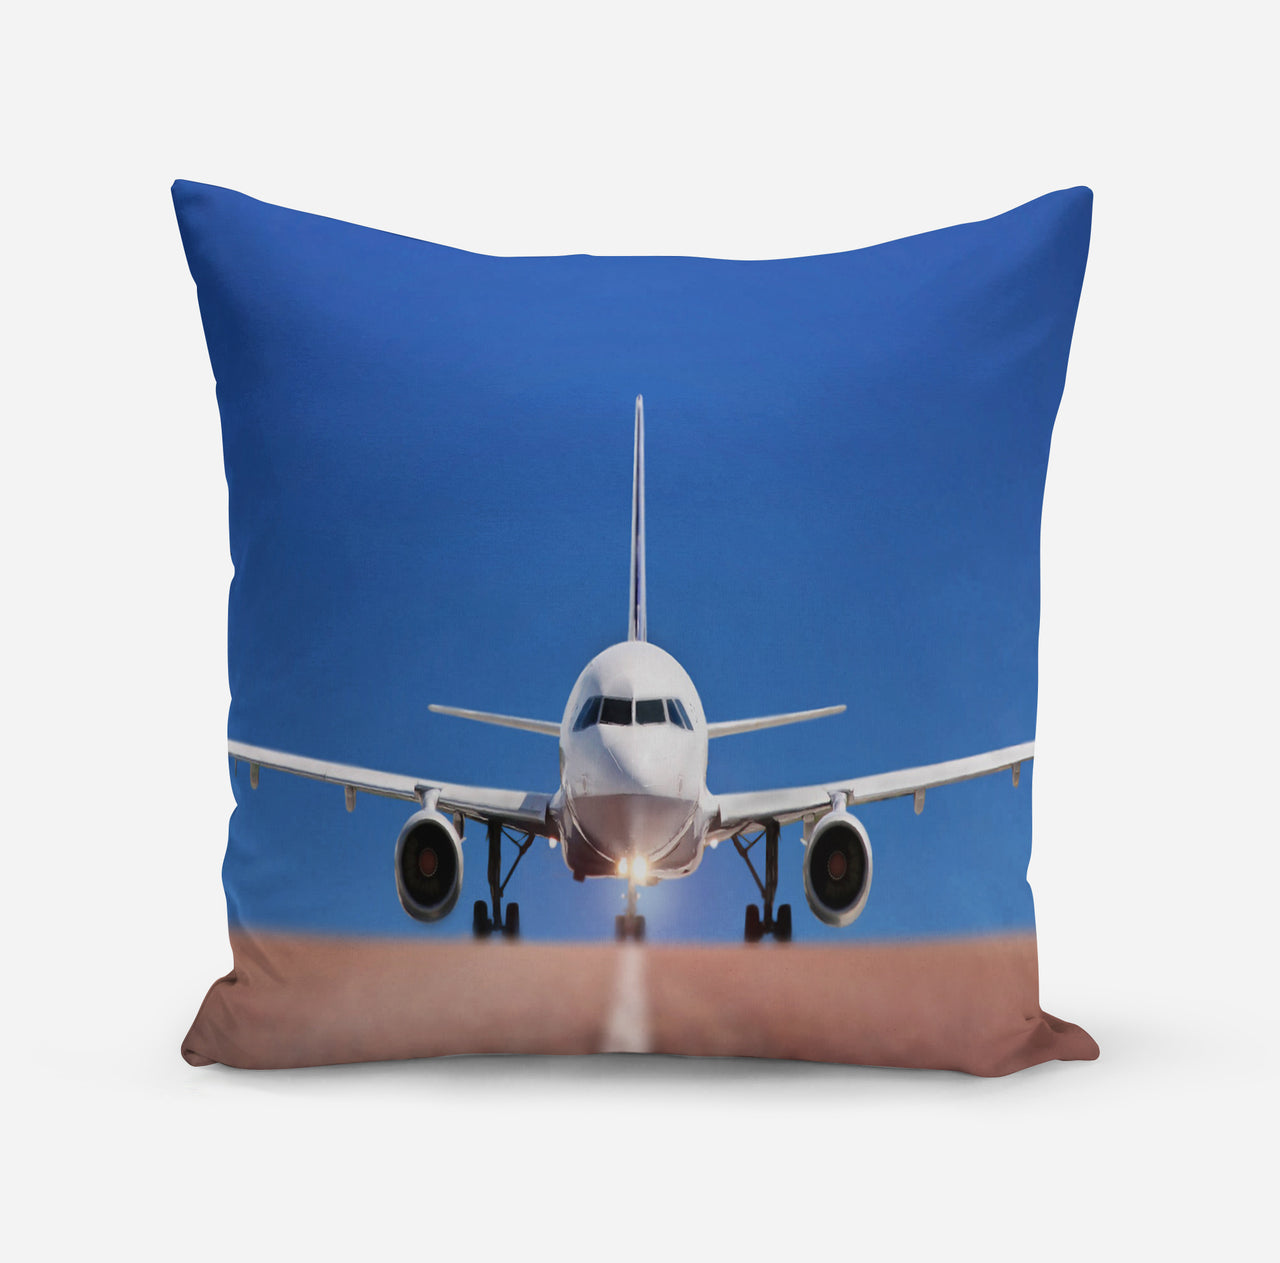 Face to Face with Airbus A320 Designed Pillows